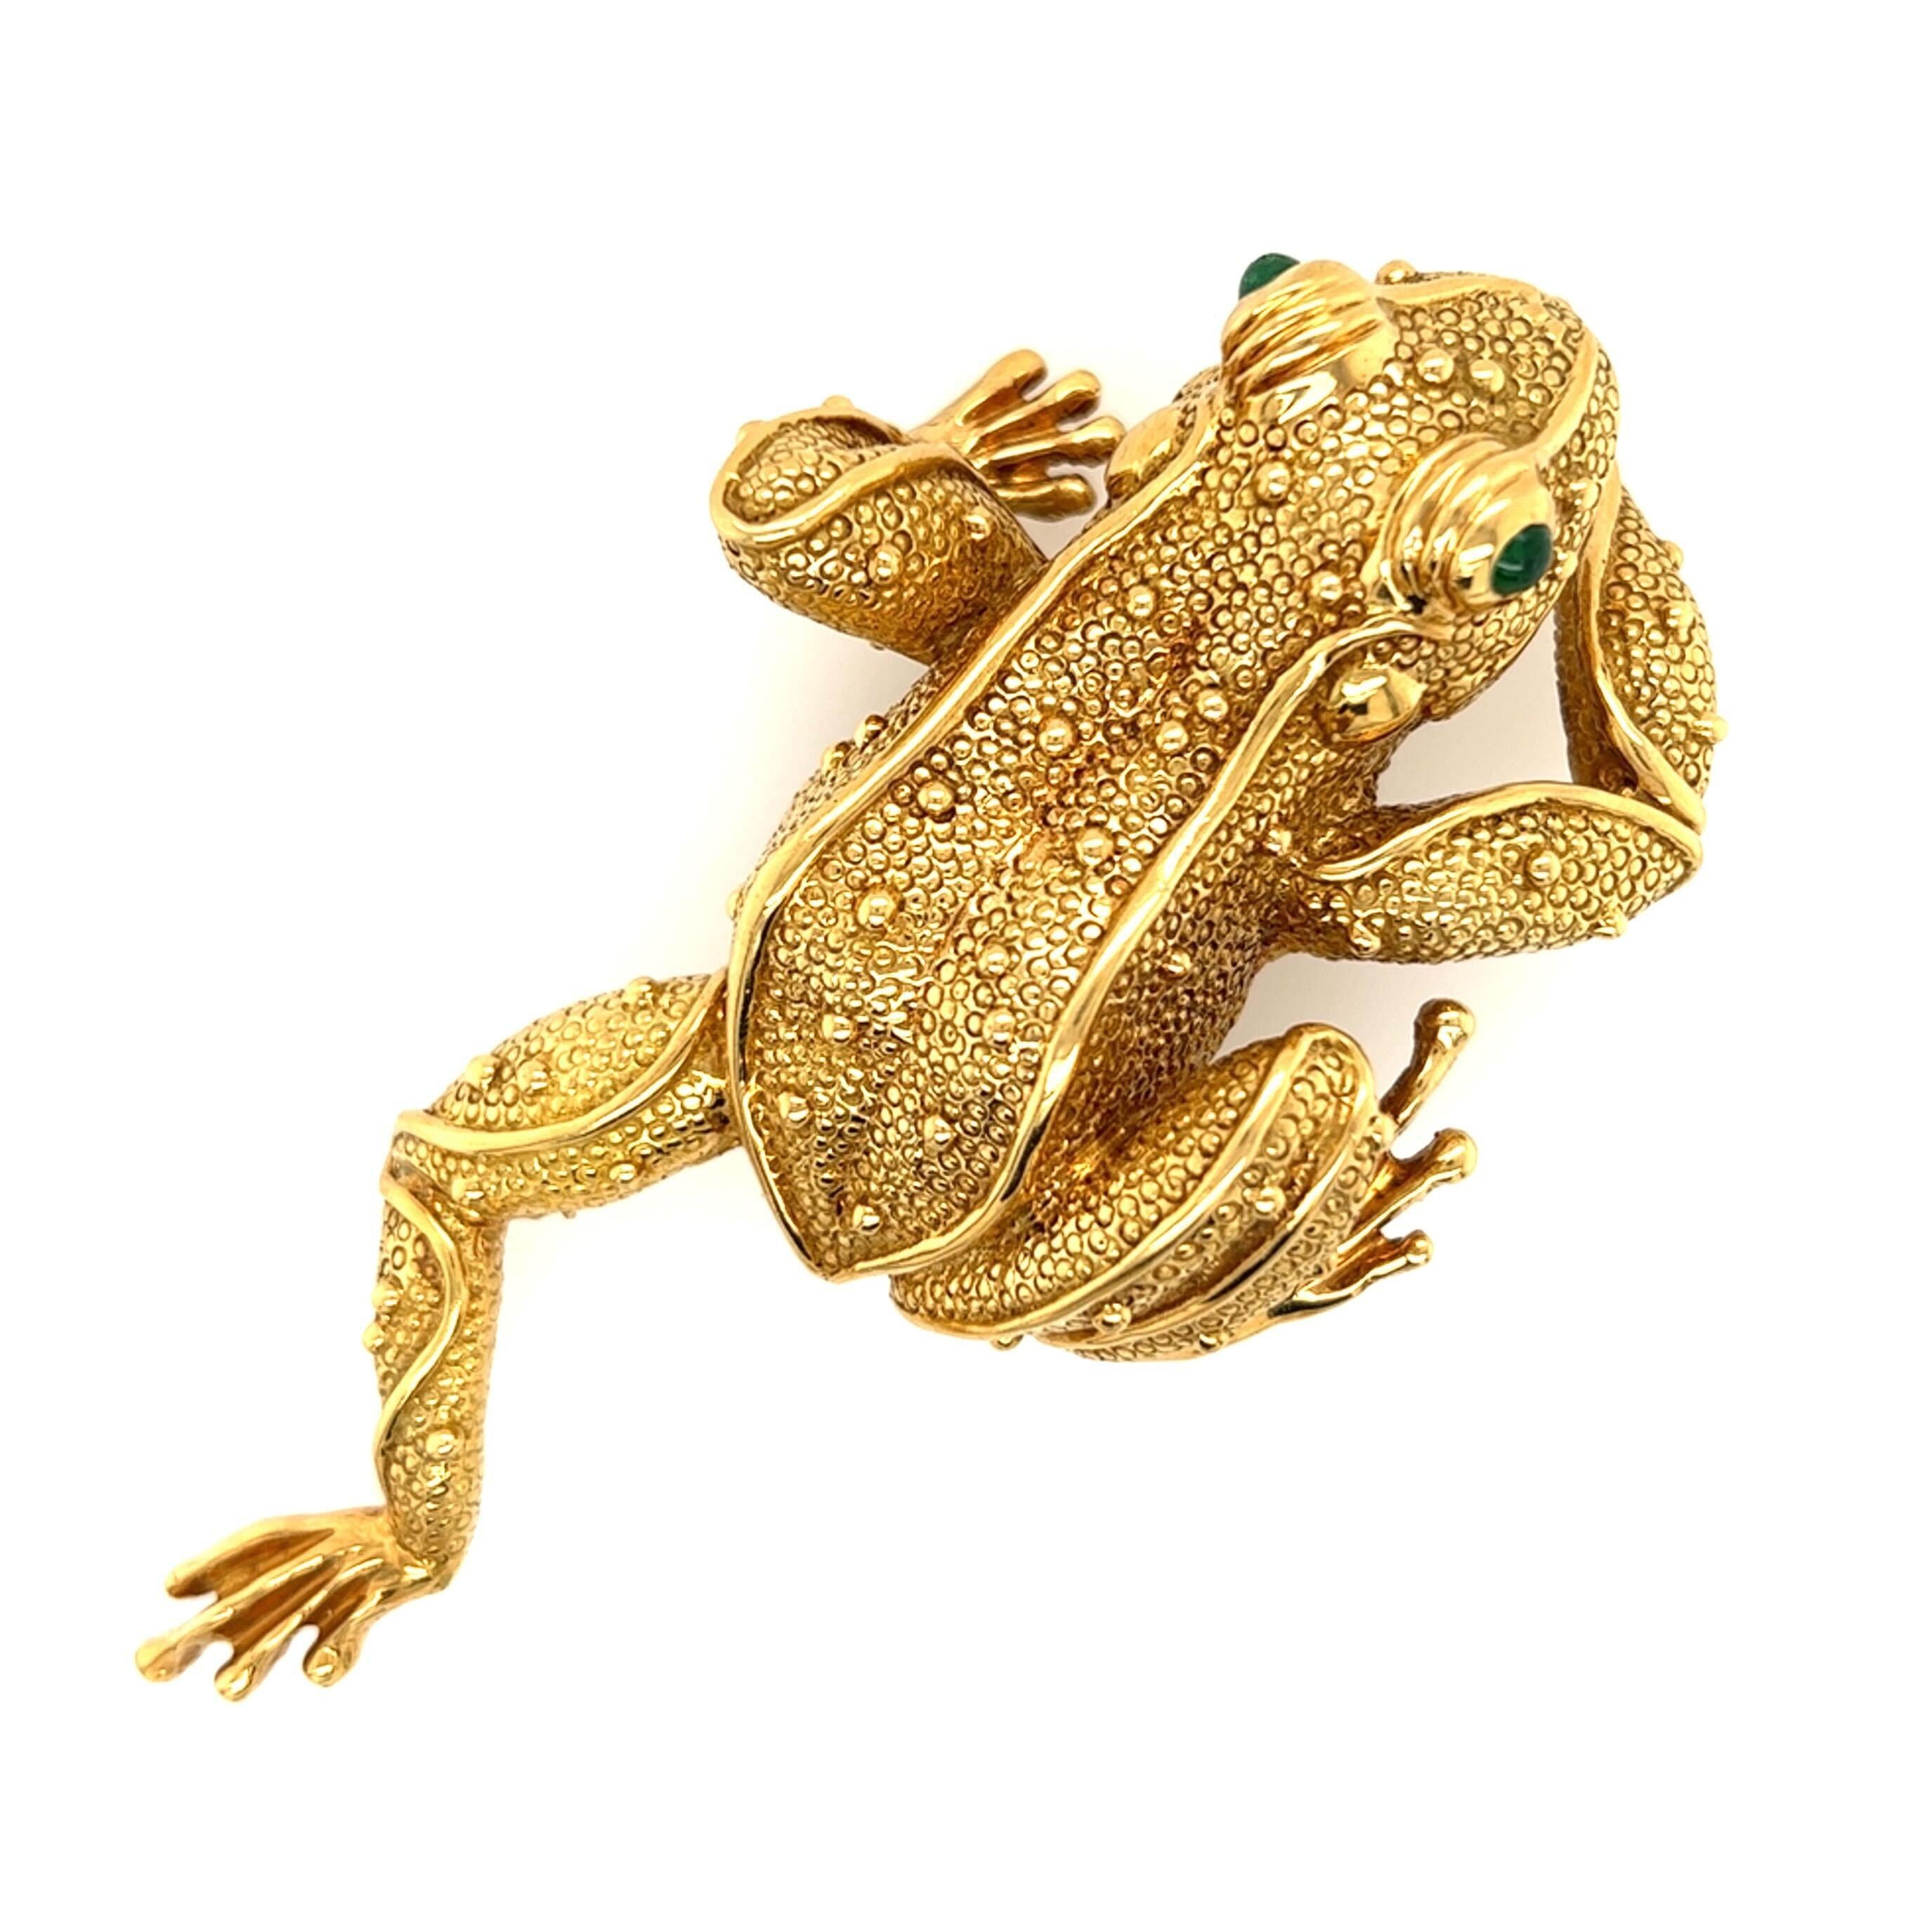 An 18 karat yellow gold frog brooch, with cabochon emerald eyes. Length is approximately 4 inches, gross weight is approximately 88.0 grams. 